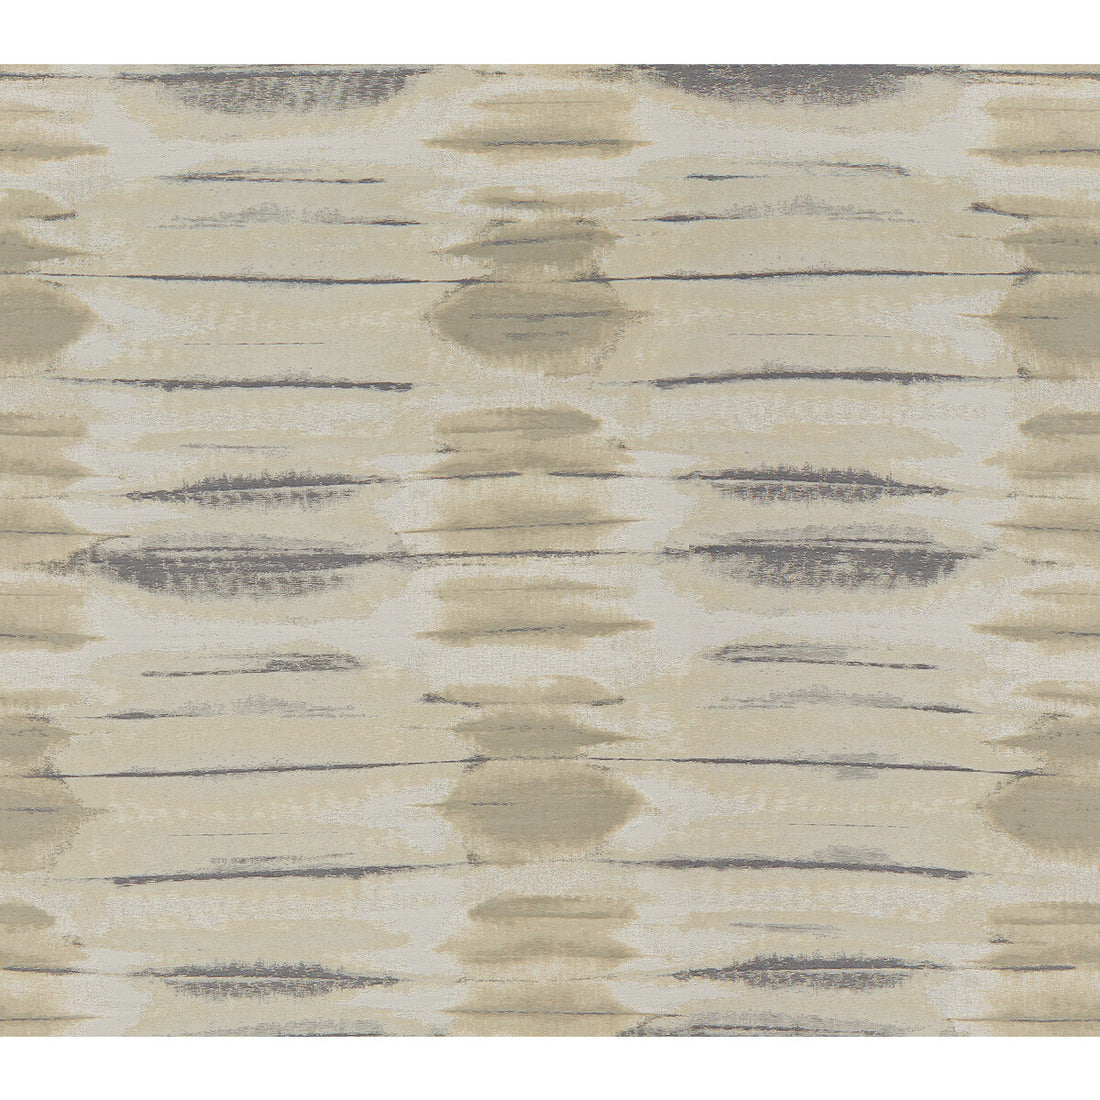 Tantino fabric in stone color - pattern 34596.1611.0 - by Kravet Design